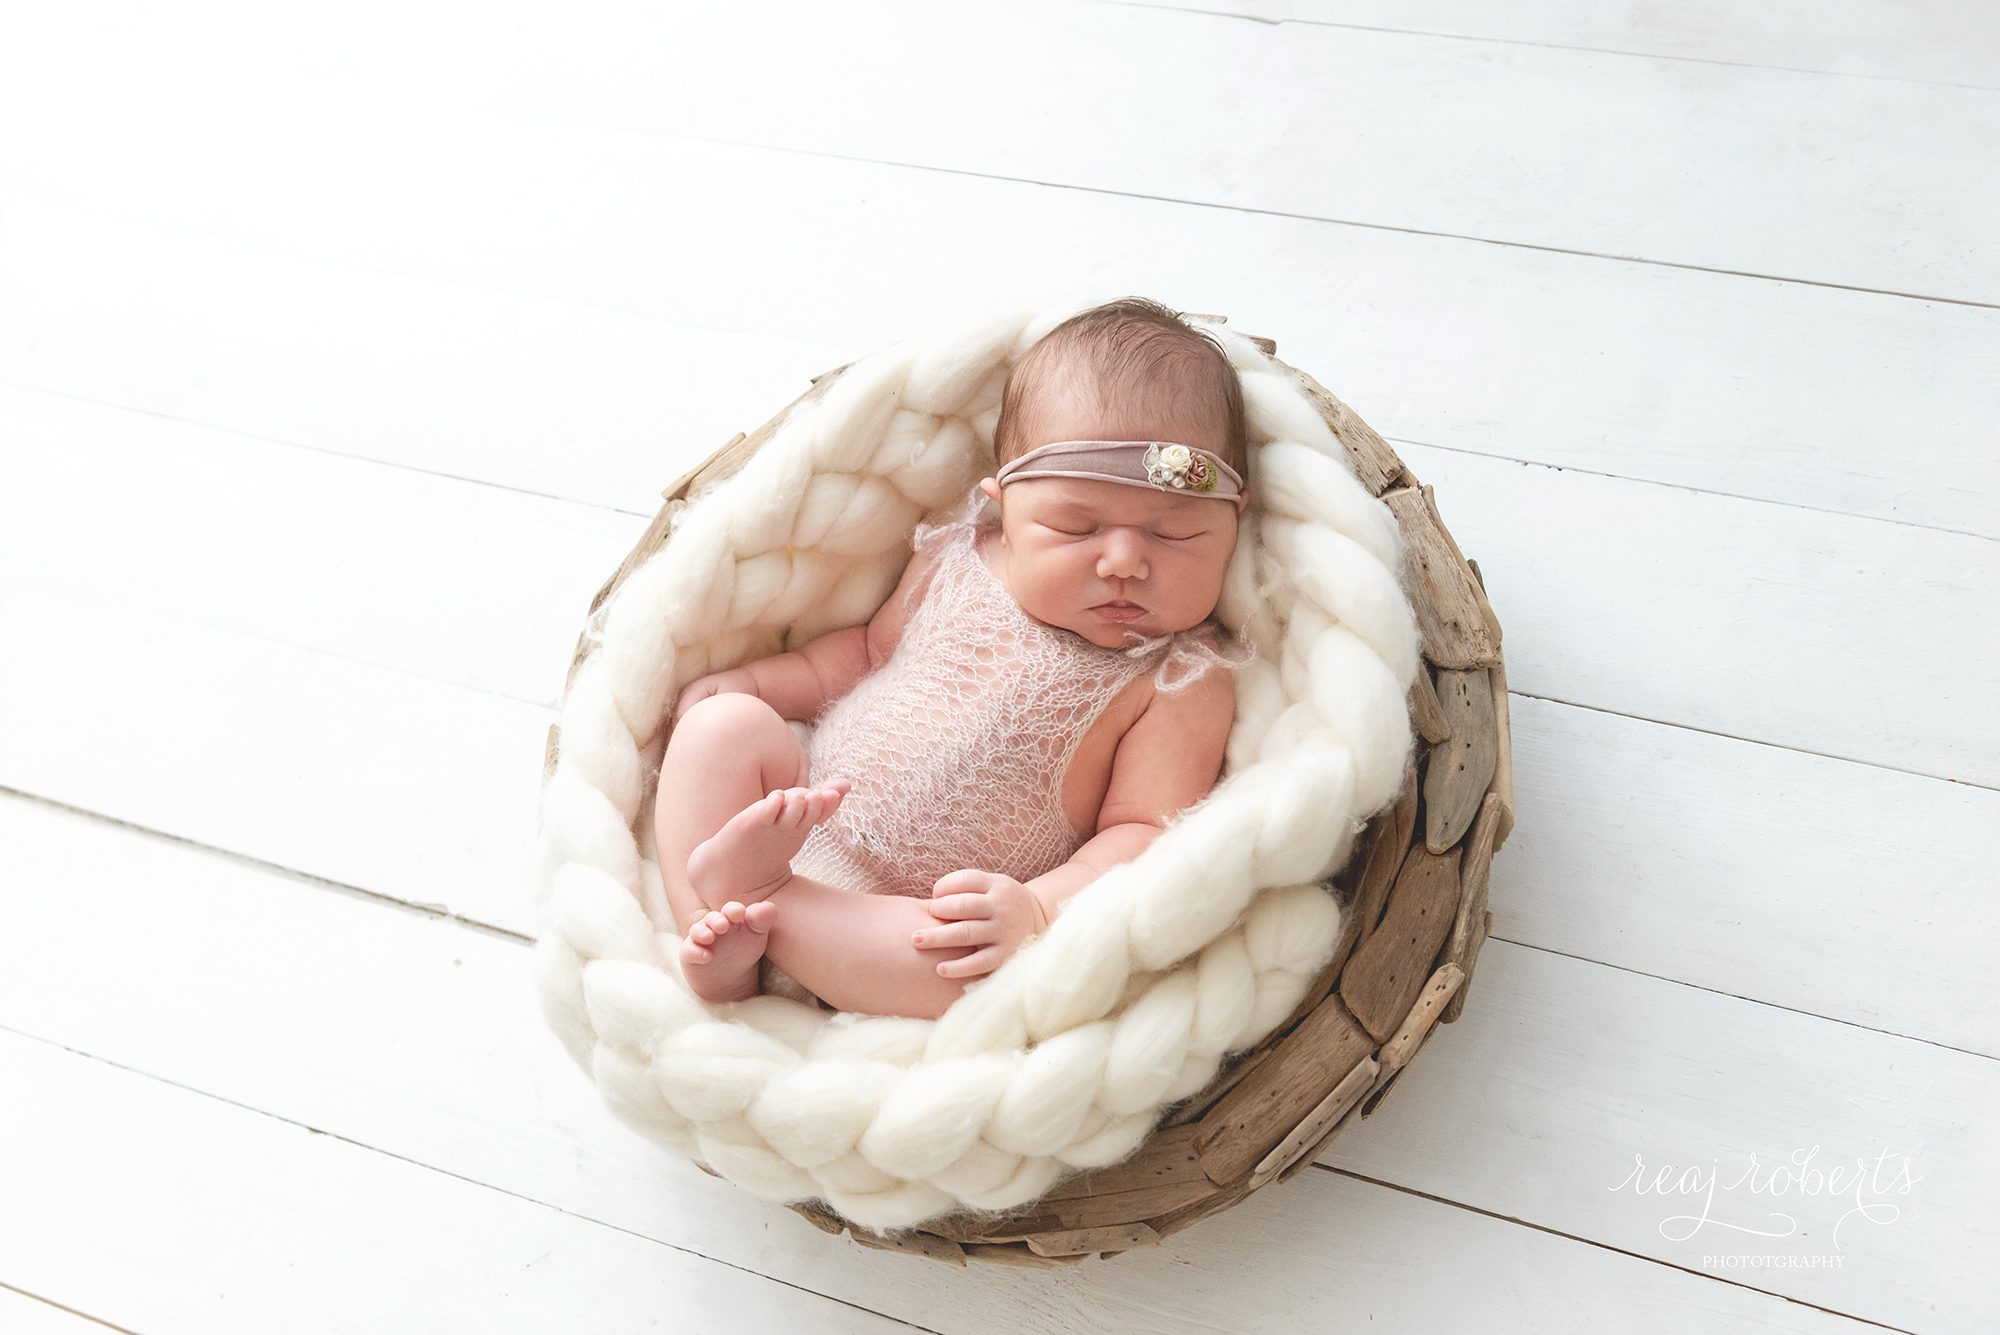 baby girl mohair knit lace romper cream wool braid in driftwood bowl white wood floor studio newborn photography | Reaj Roberts Photography